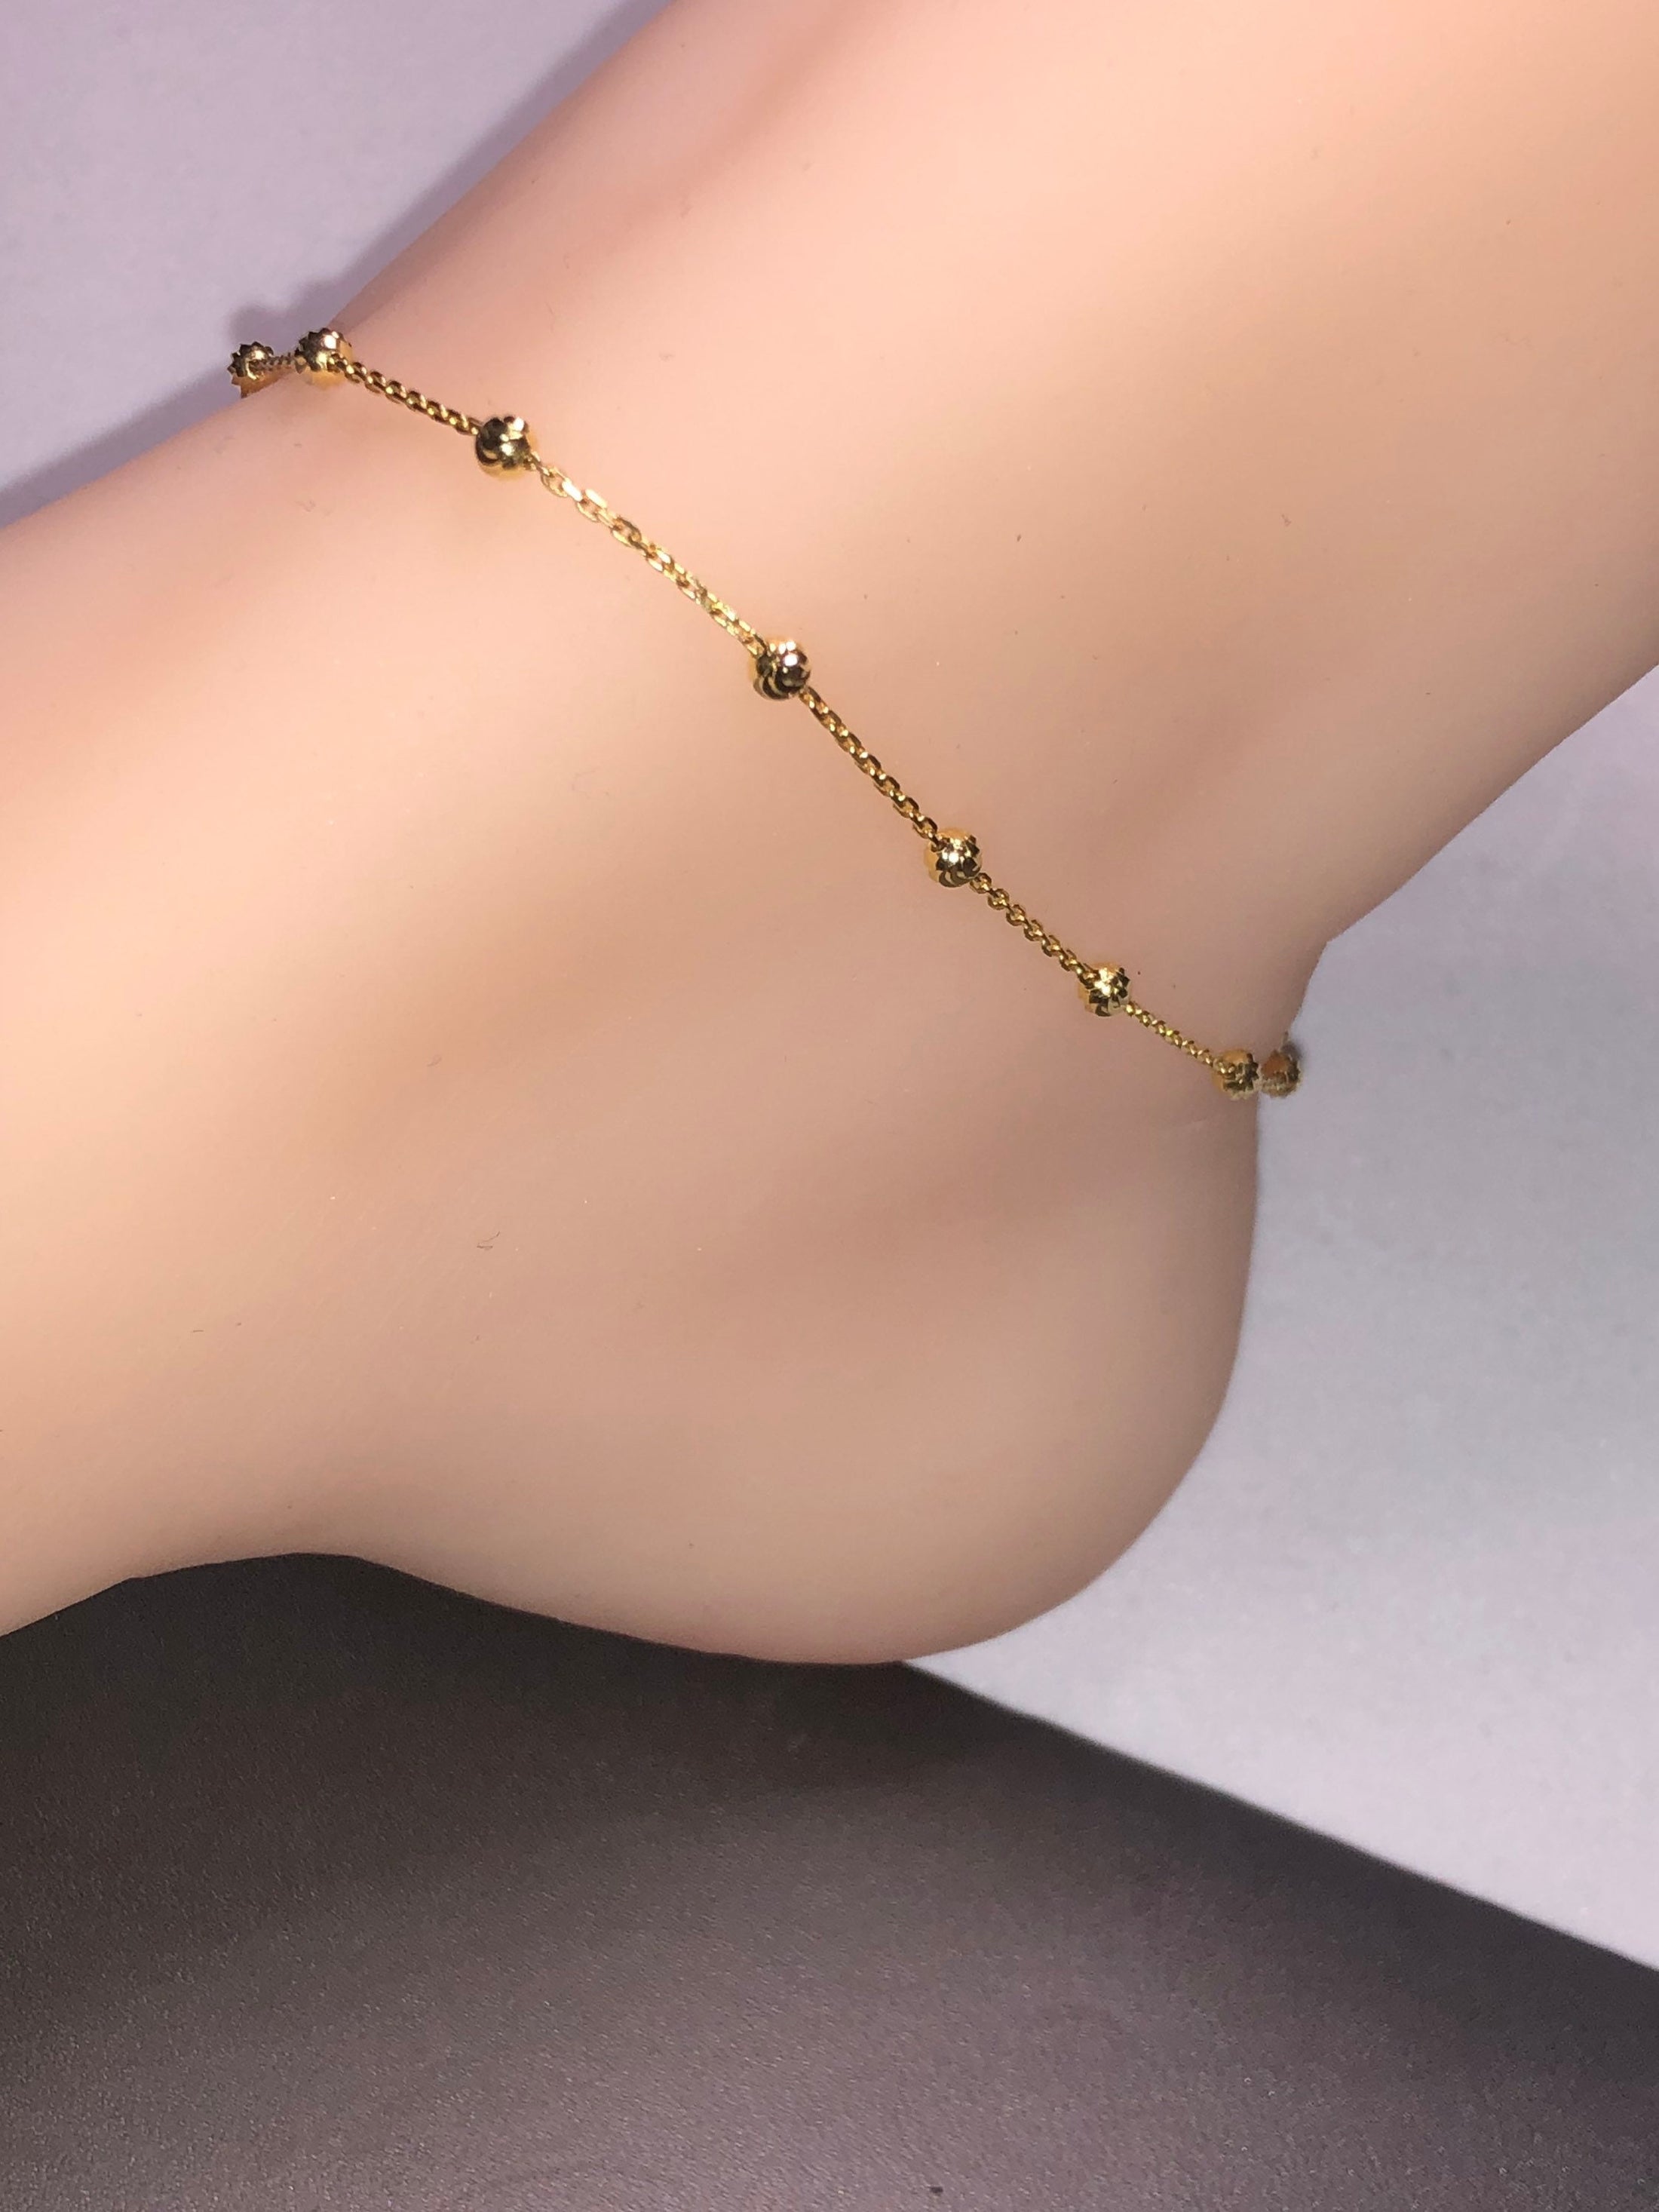 10k yellow gold vermeil anklet for women beautiful dainty design for daily wear real gold wrapped heavily over Italian 925 for daily wear